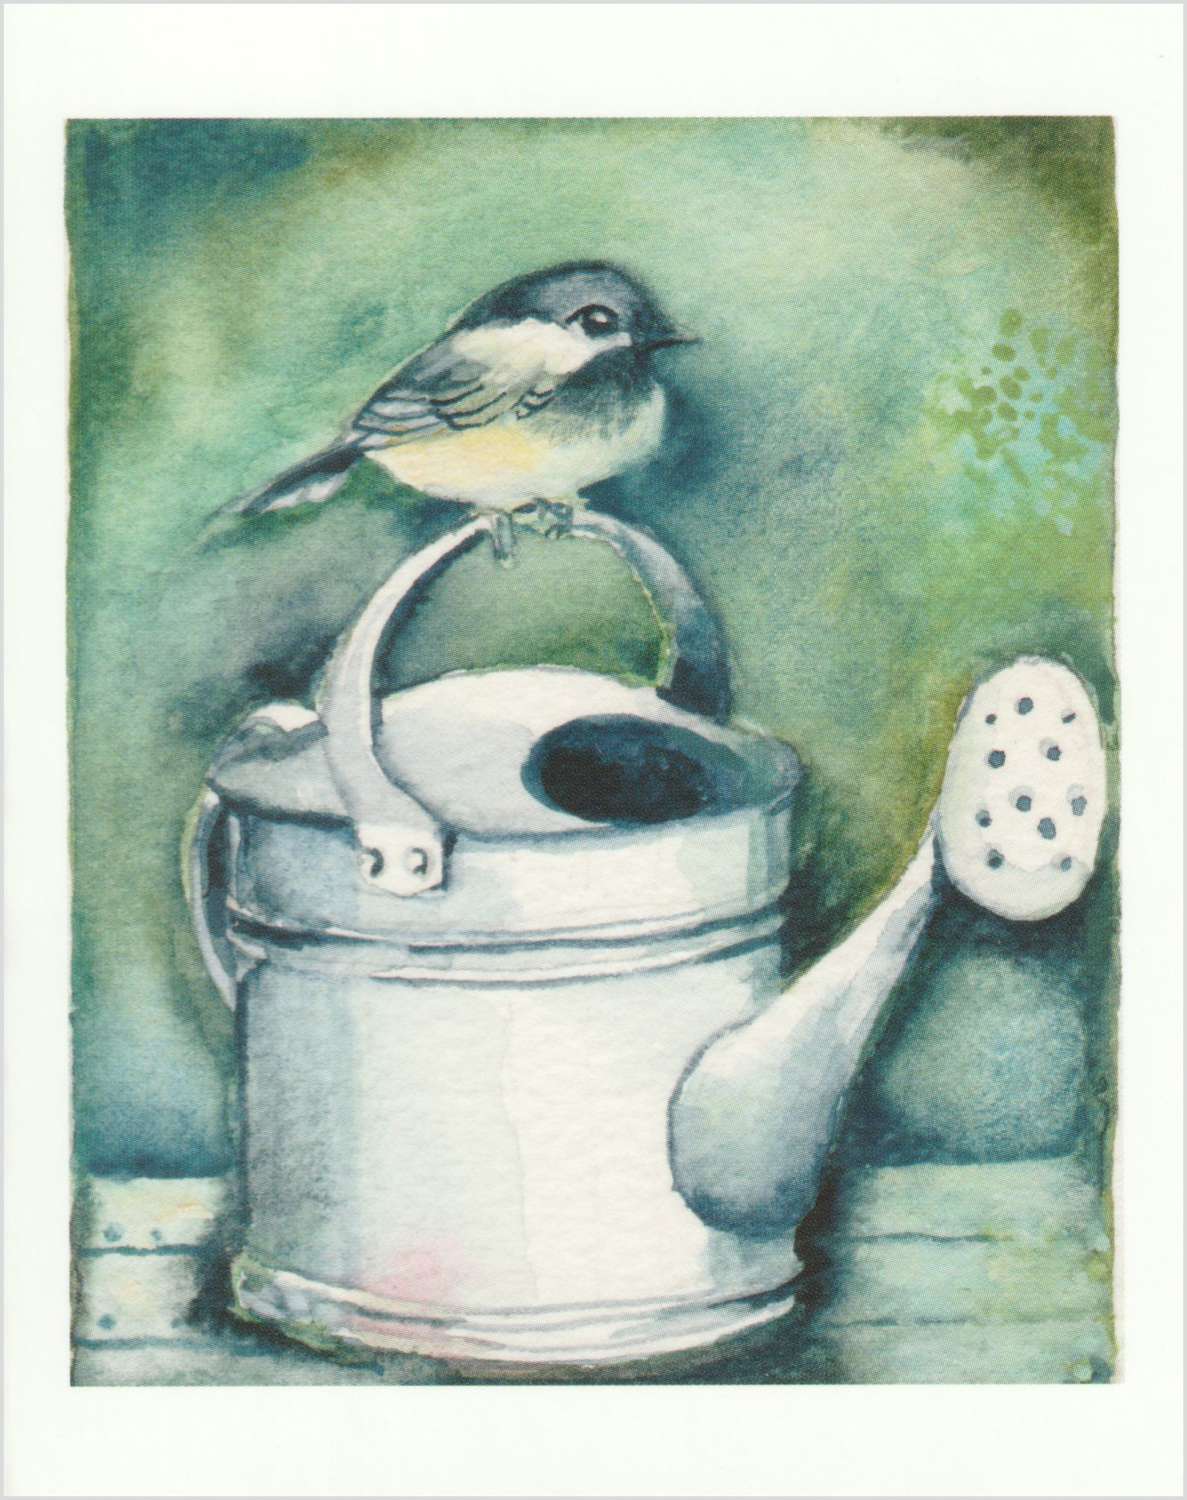 Bird on a watering can